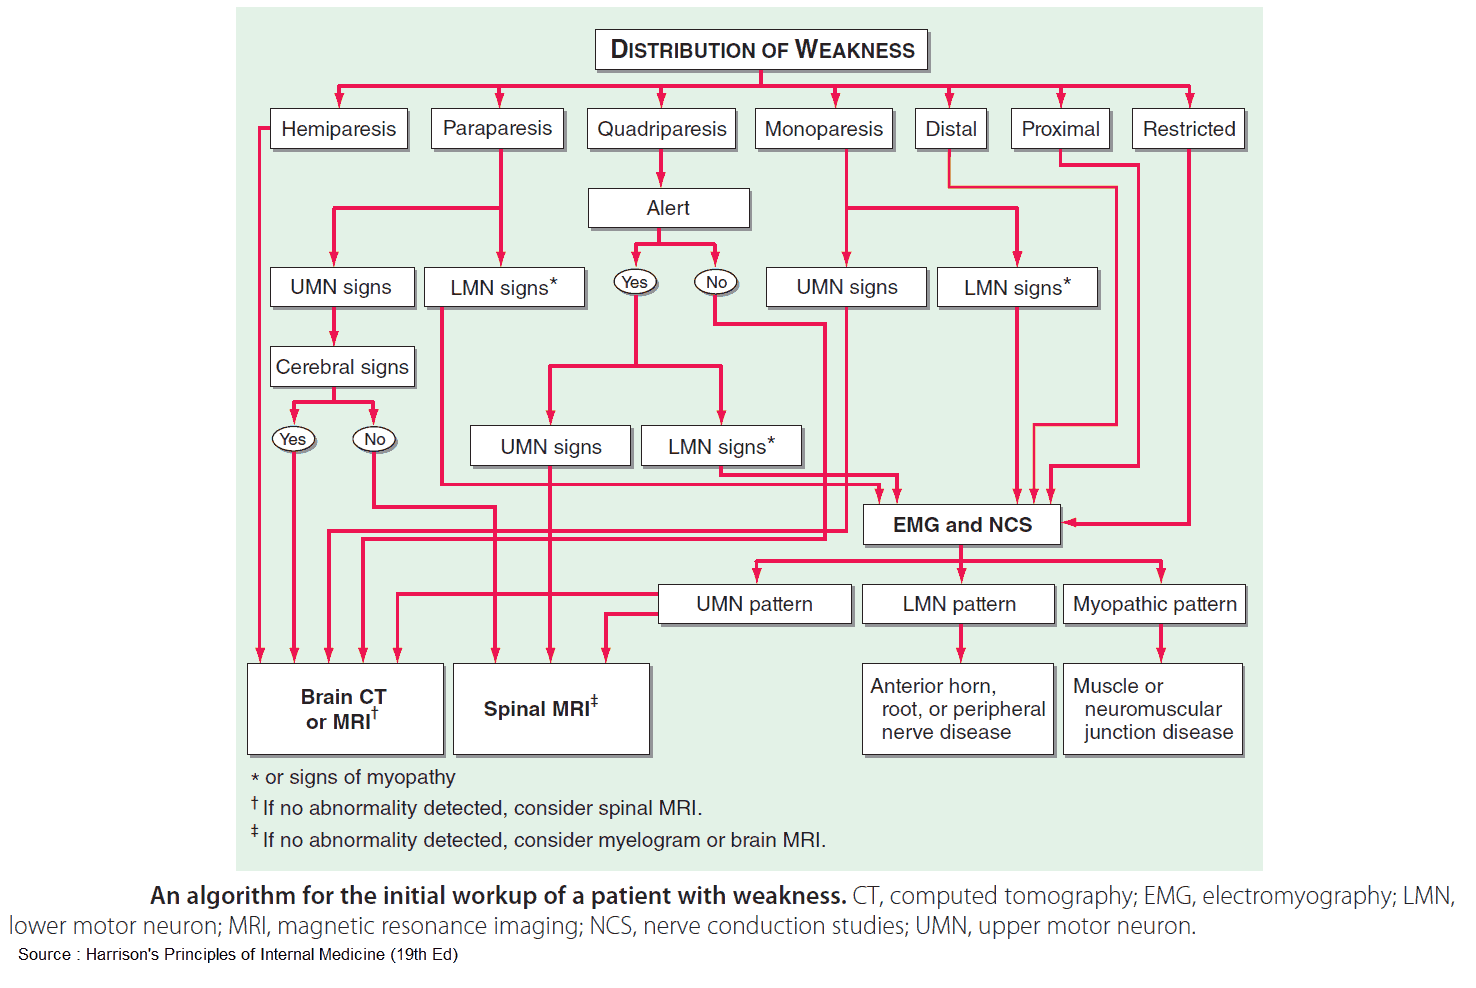 Motor Neurologic Deficit and Neurologic Muscle Weakness - An Algorithm for the Initial Workup